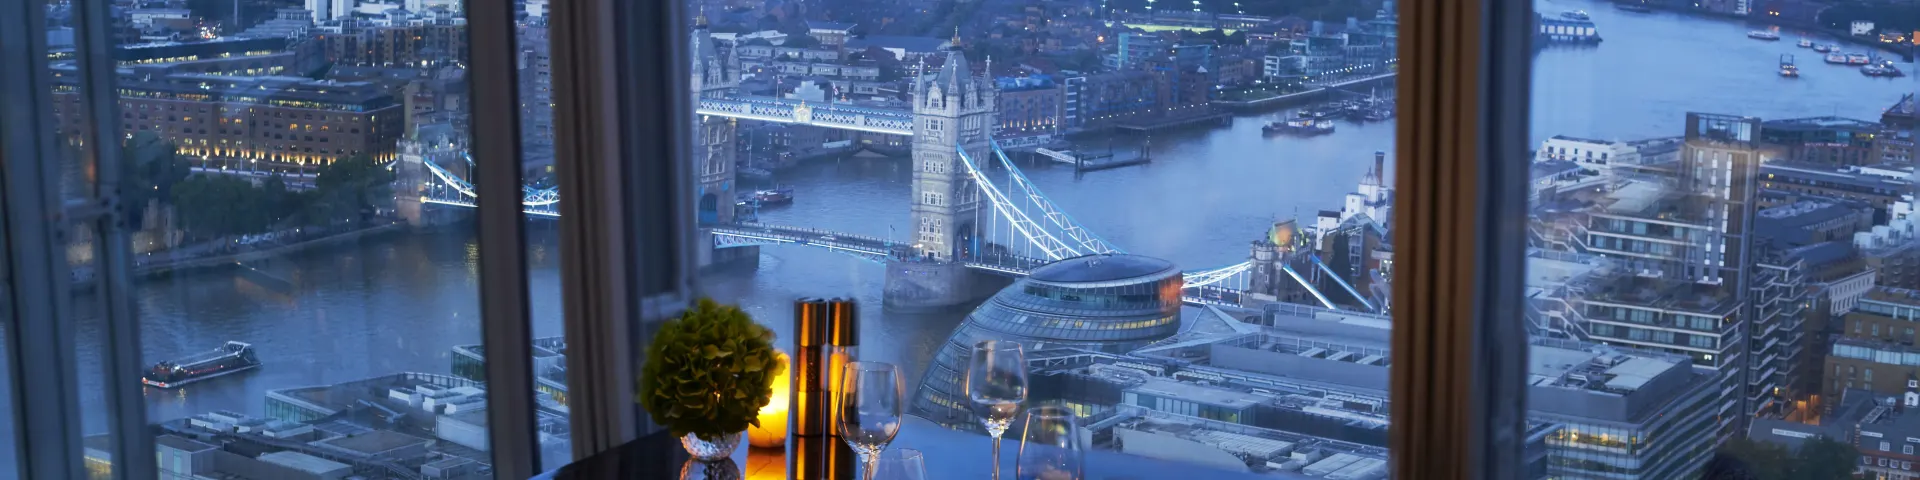 Shangri La Hotel, At The Shard, London, Ting Restaurant, Table With View